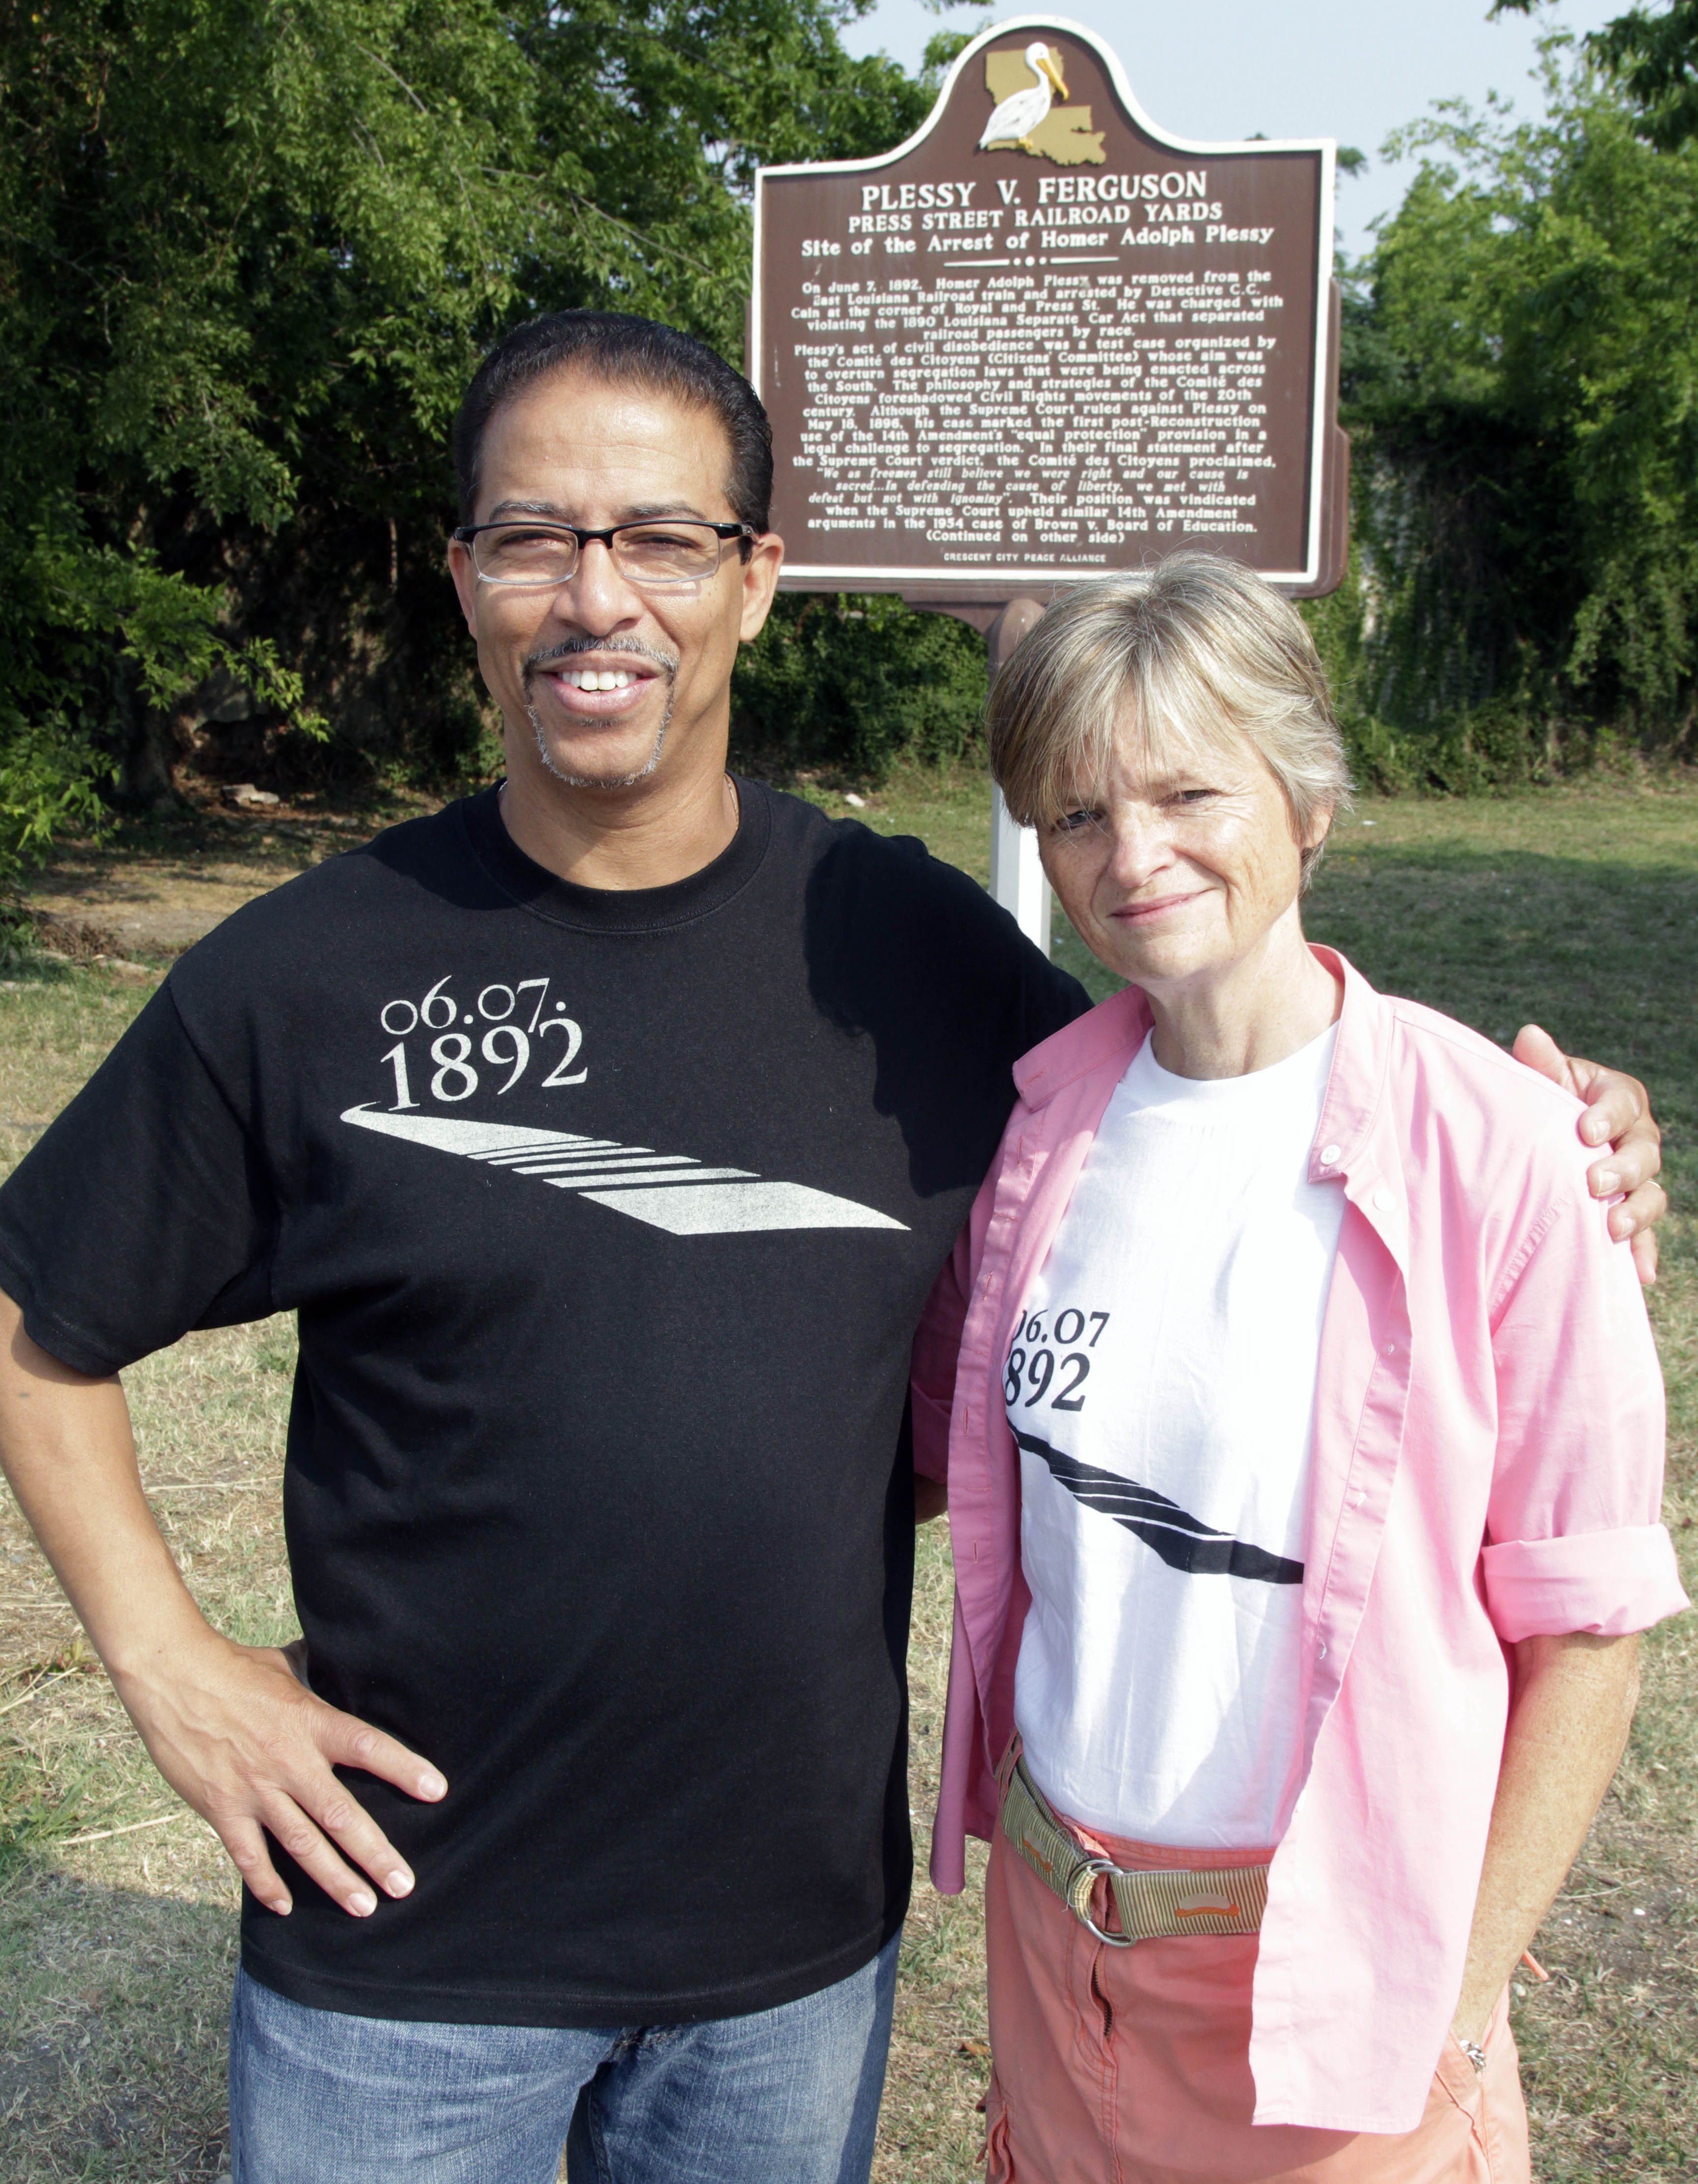 Keith Plessy and Phoebe Ferguson, descendants of the principals in the Plessy v. Ferguson court case, pose for a photograph in front of a historical marker in New Orleans on June 7, 2011. (Bill Haber—AP)